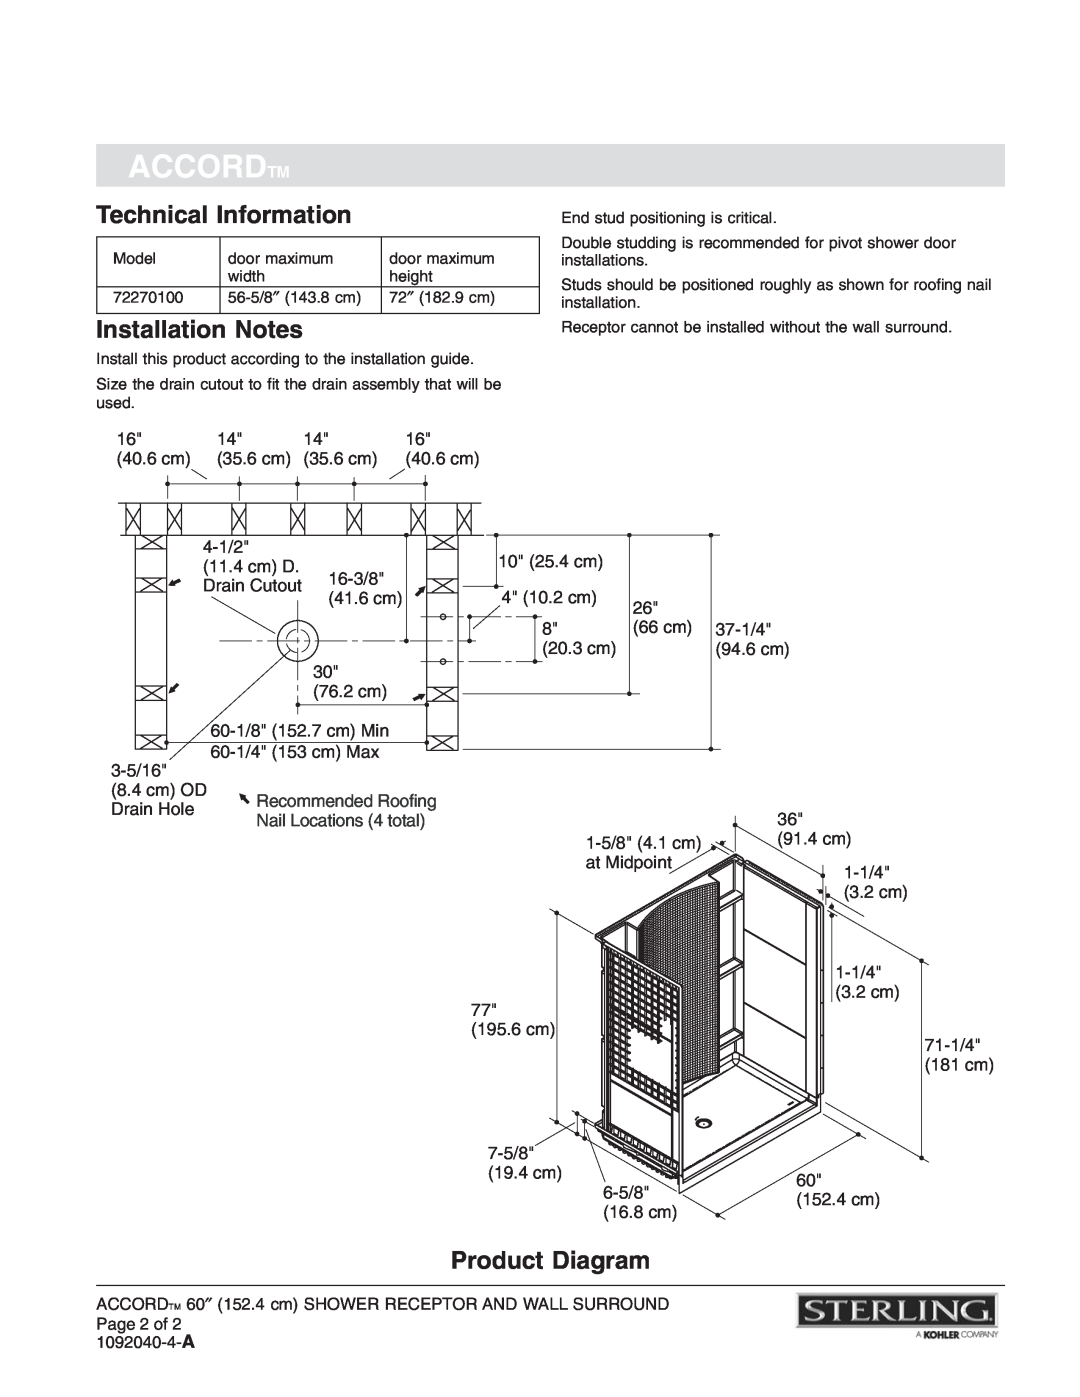 Sterling Plumbing 72270100 warranty Technical Information, Installation Notes, Product Diagram, Accordtm 